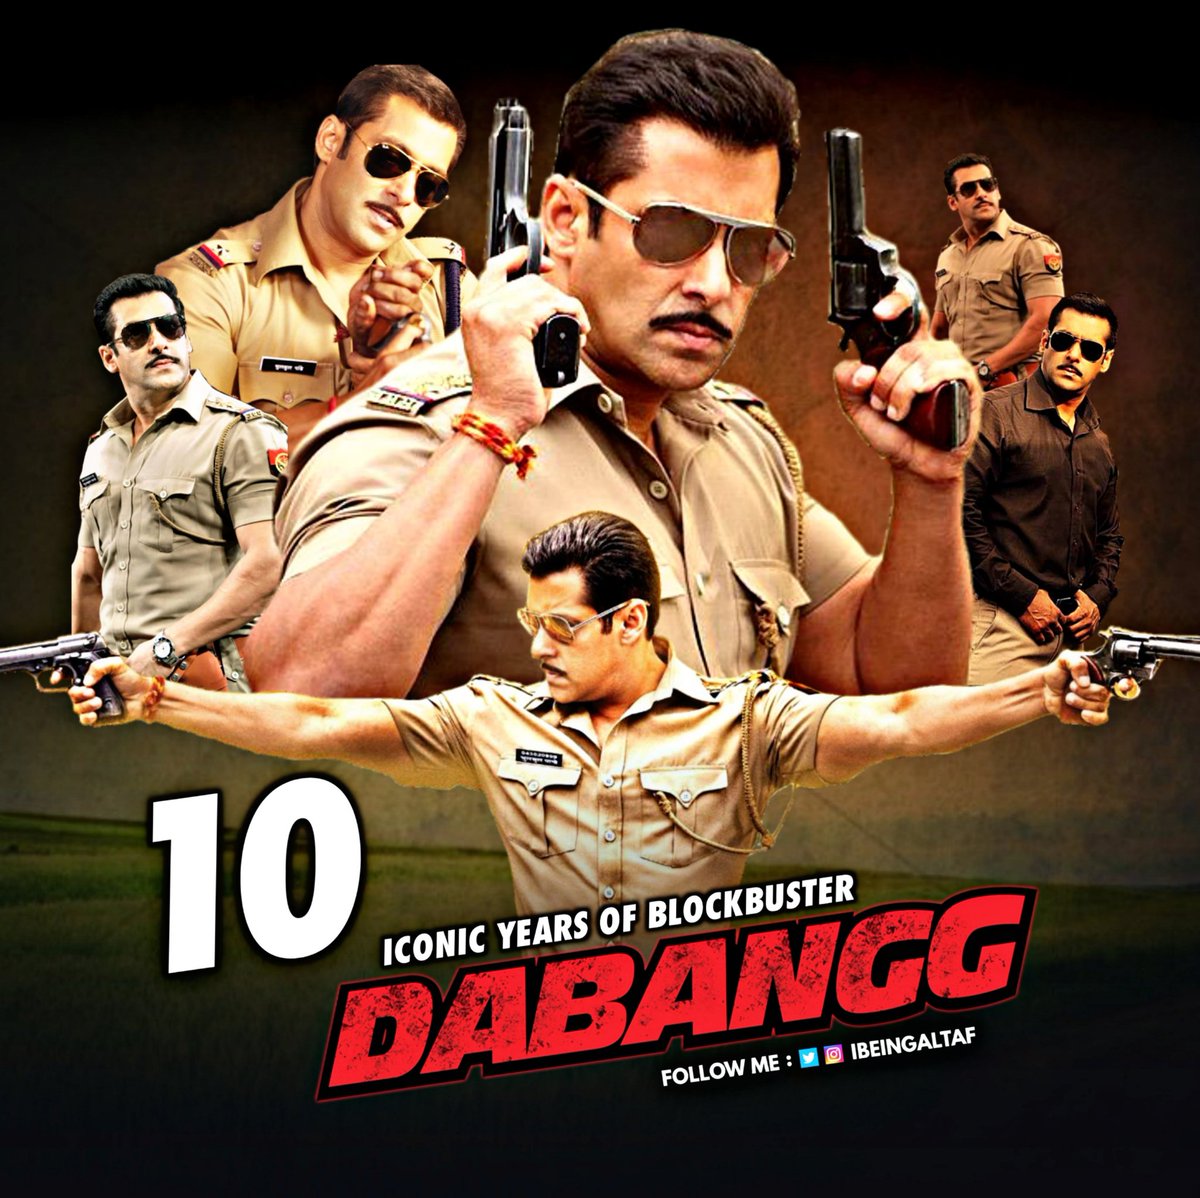 A Film Which Started Policegiri Trend. A Film Which Changes The Level of Action Films. No One Can Ever Forget #ChulbulPandey ❤️😍

#10YearsOfDabangg